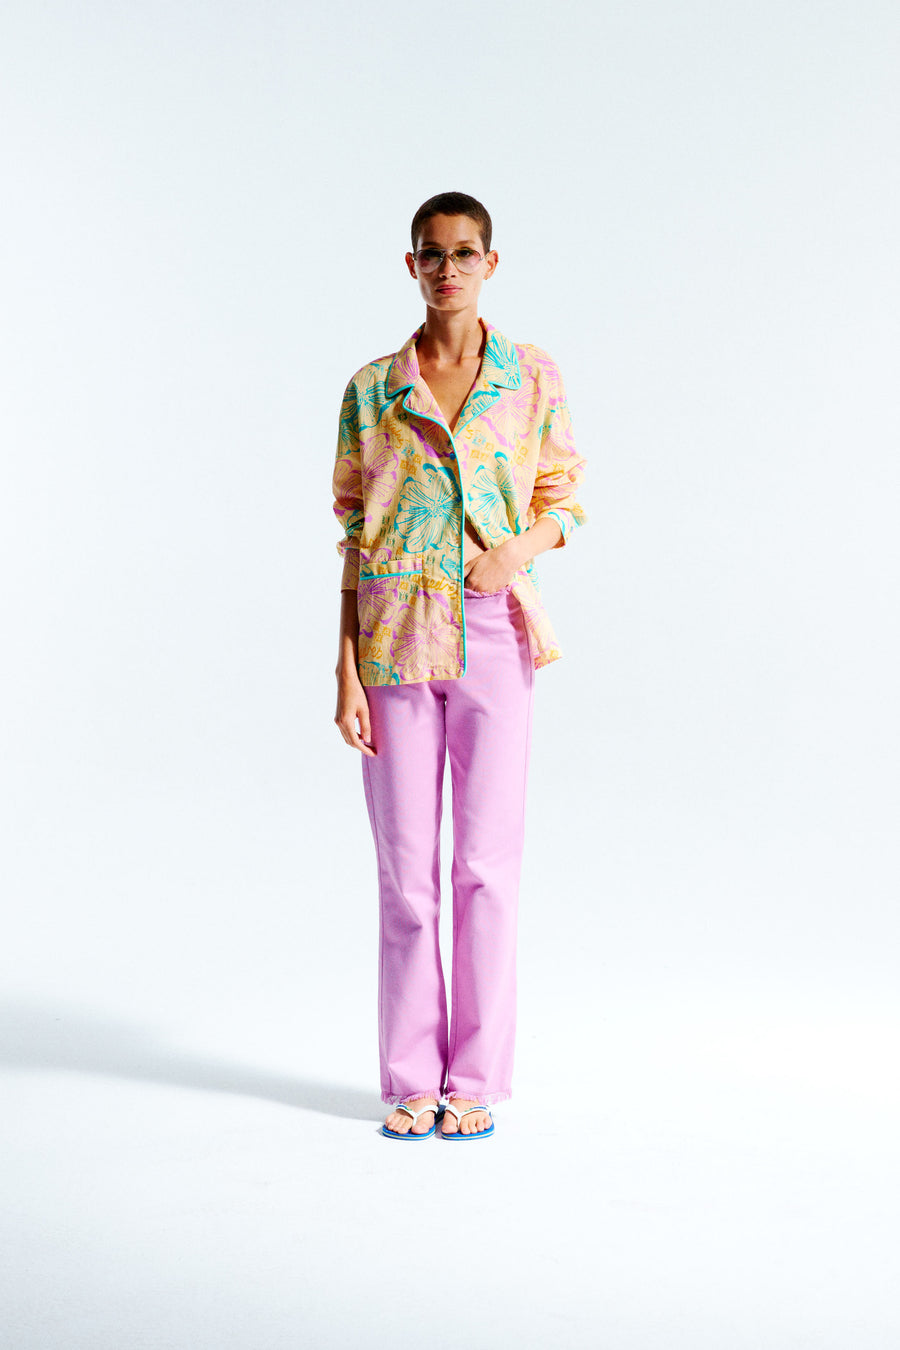 NICO - Flower printed shirt with contrast piping